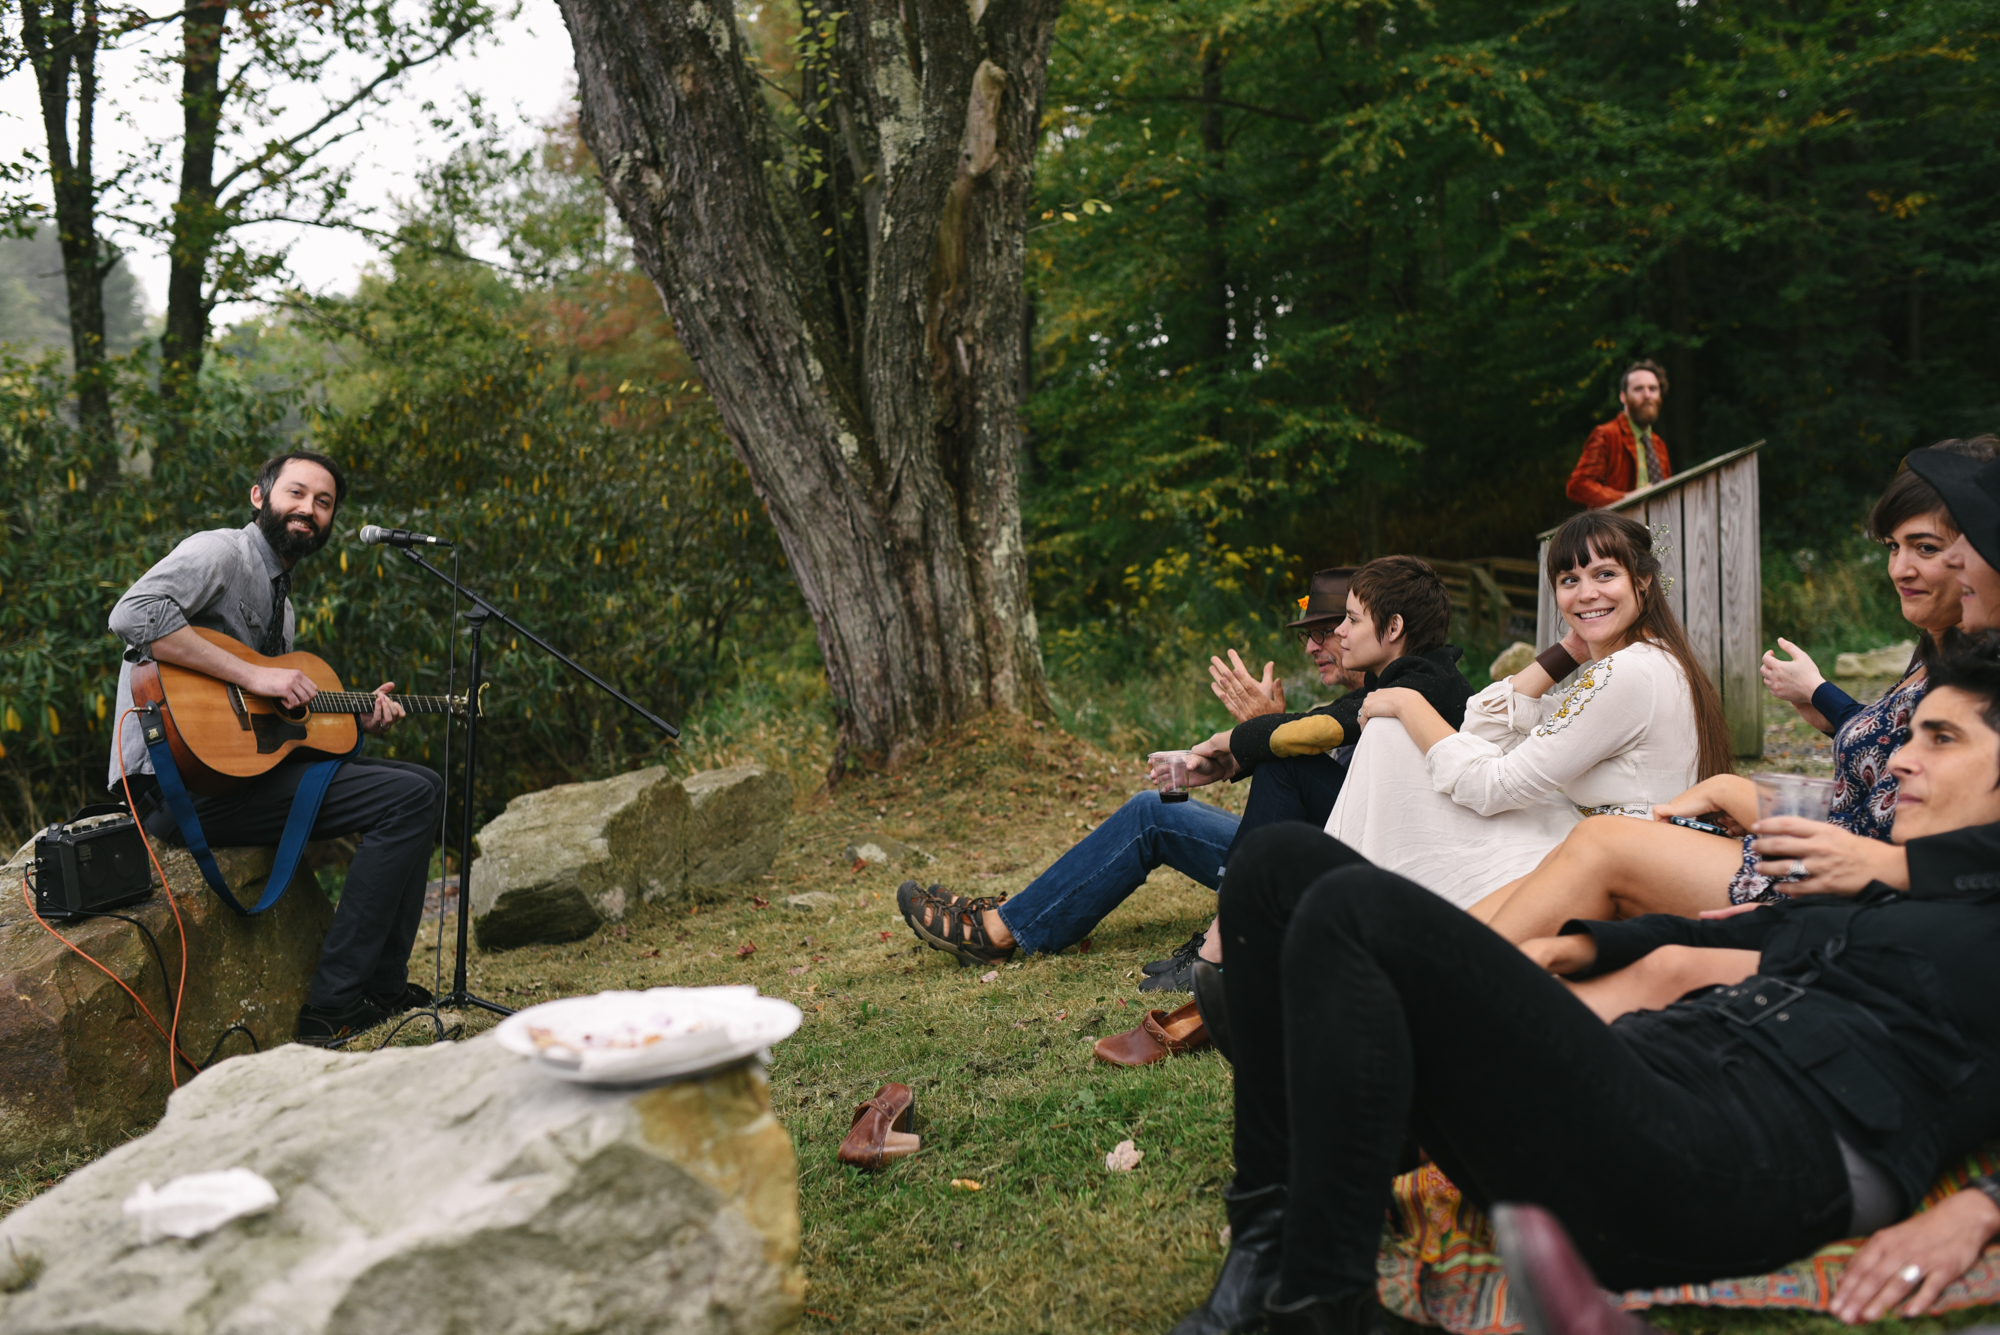  Mountain Wedding, Outdoors, Rustic, West Virginia, Maryland Wedding Photographer, DIY, Casual, guests sitting in grass outside, friend playing guitar 